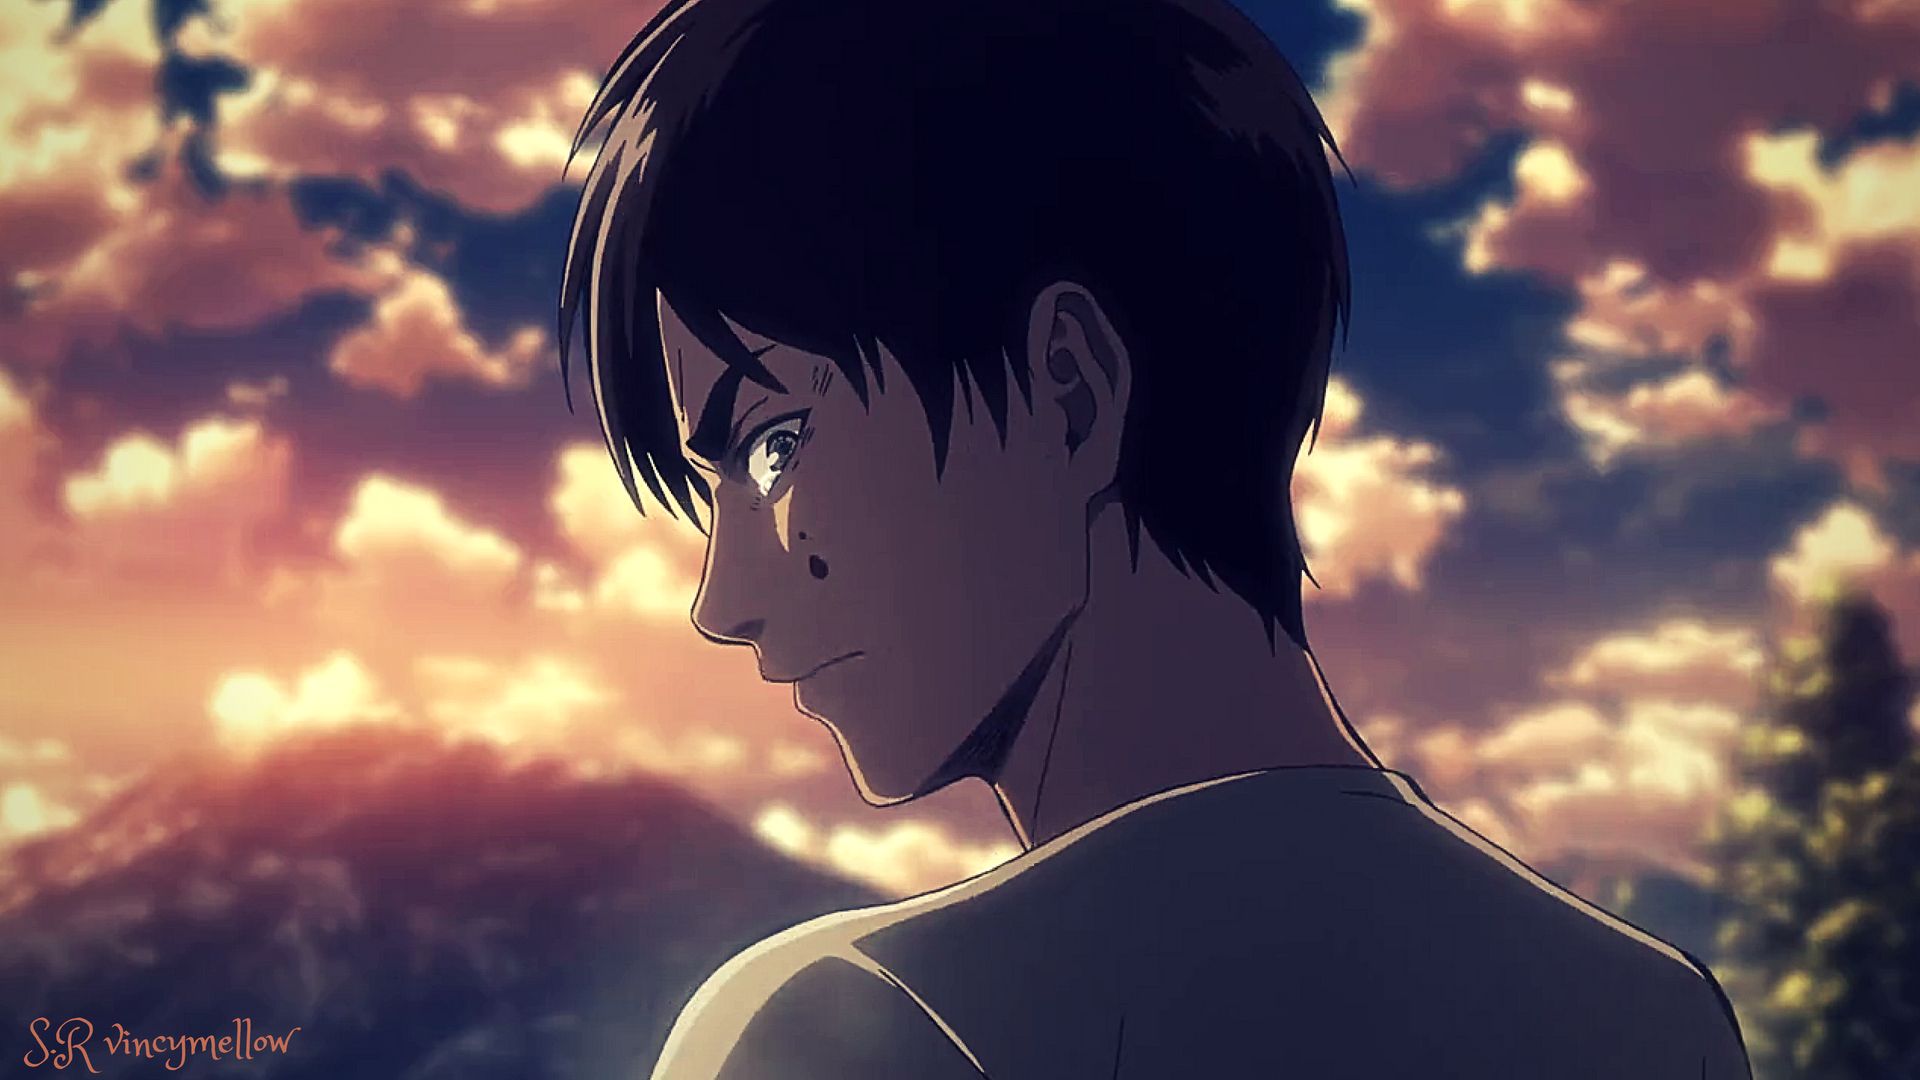 Eren Yeager Angry Crying face. Attack on titan anime